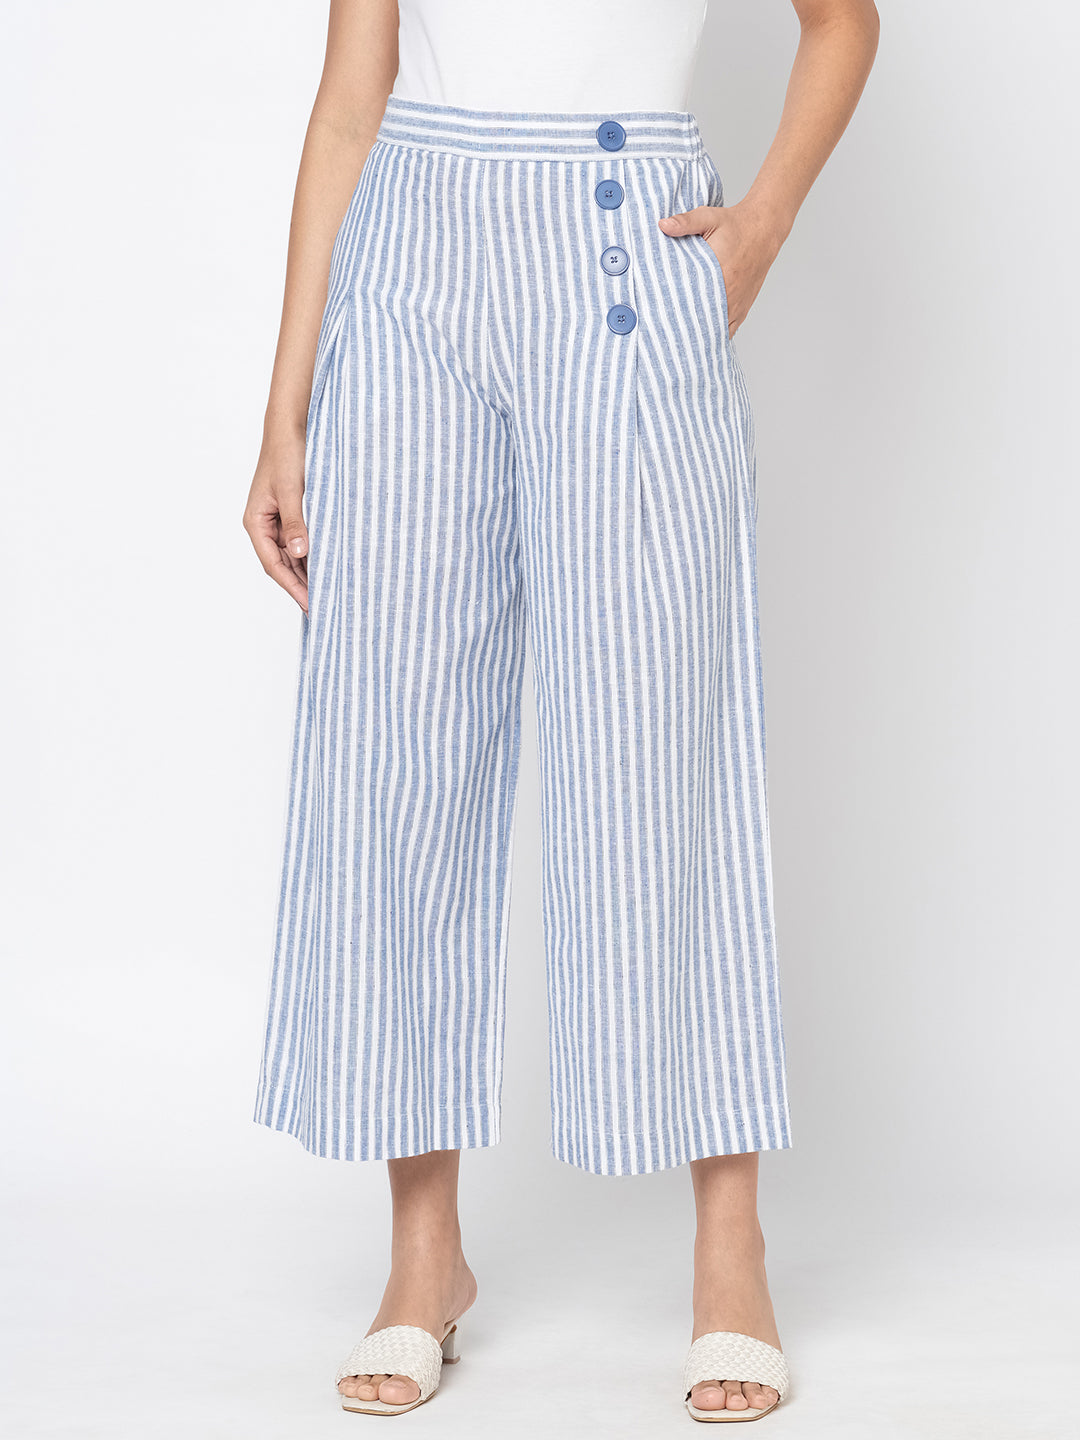 Men's Striped Trousers | Explore our New Arrivals | ZARA India